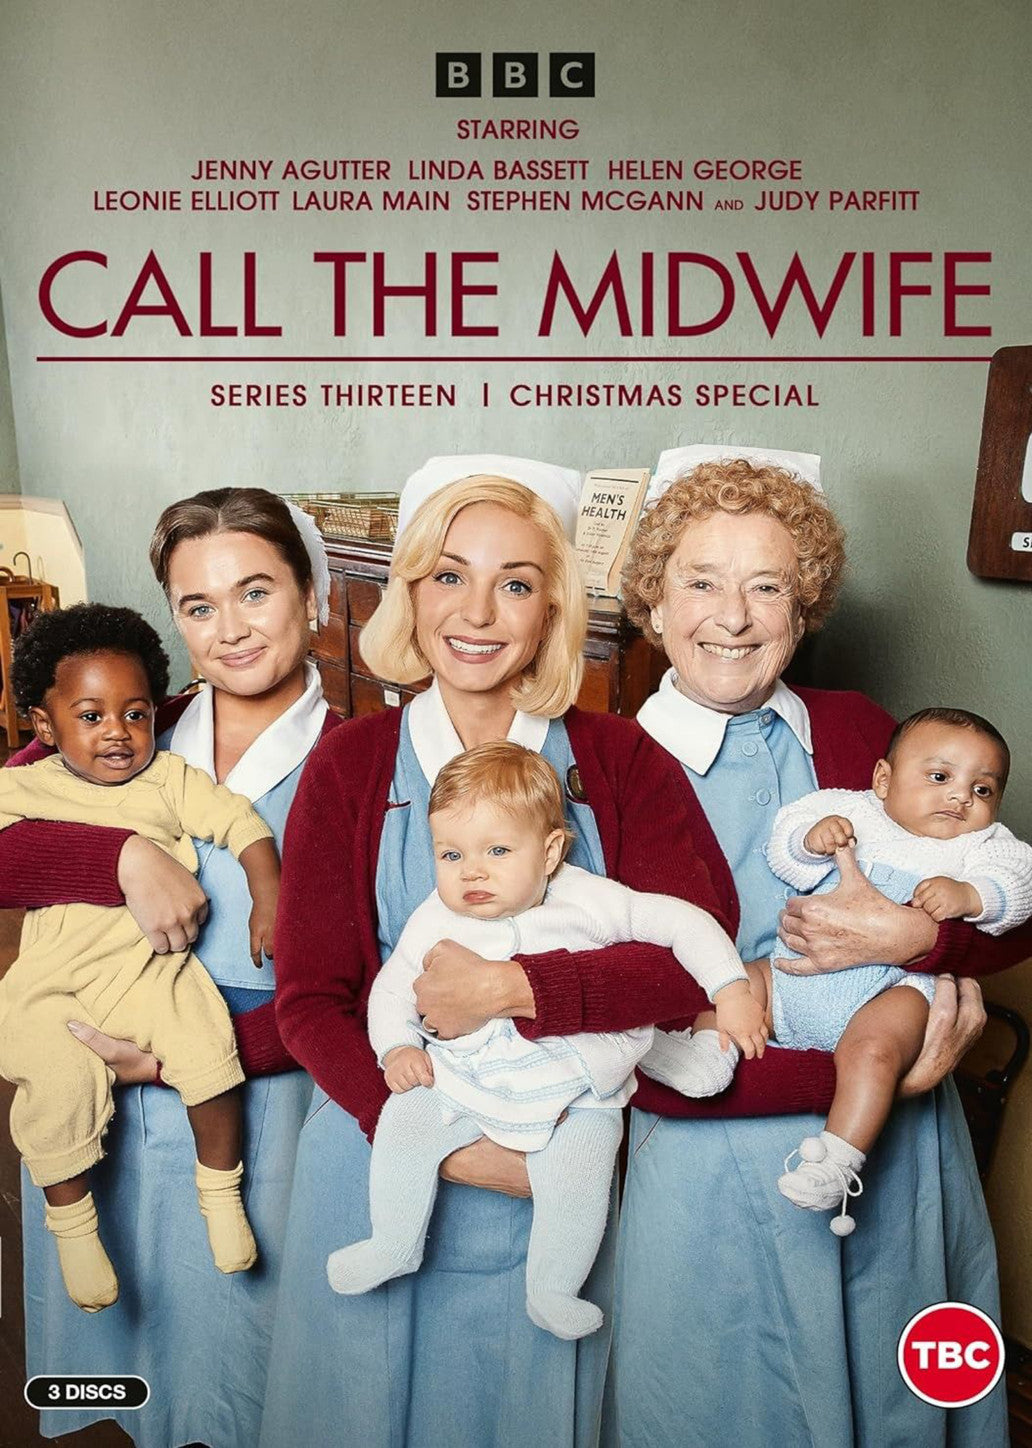 CALL THE MIDWIFE: SERIES 13